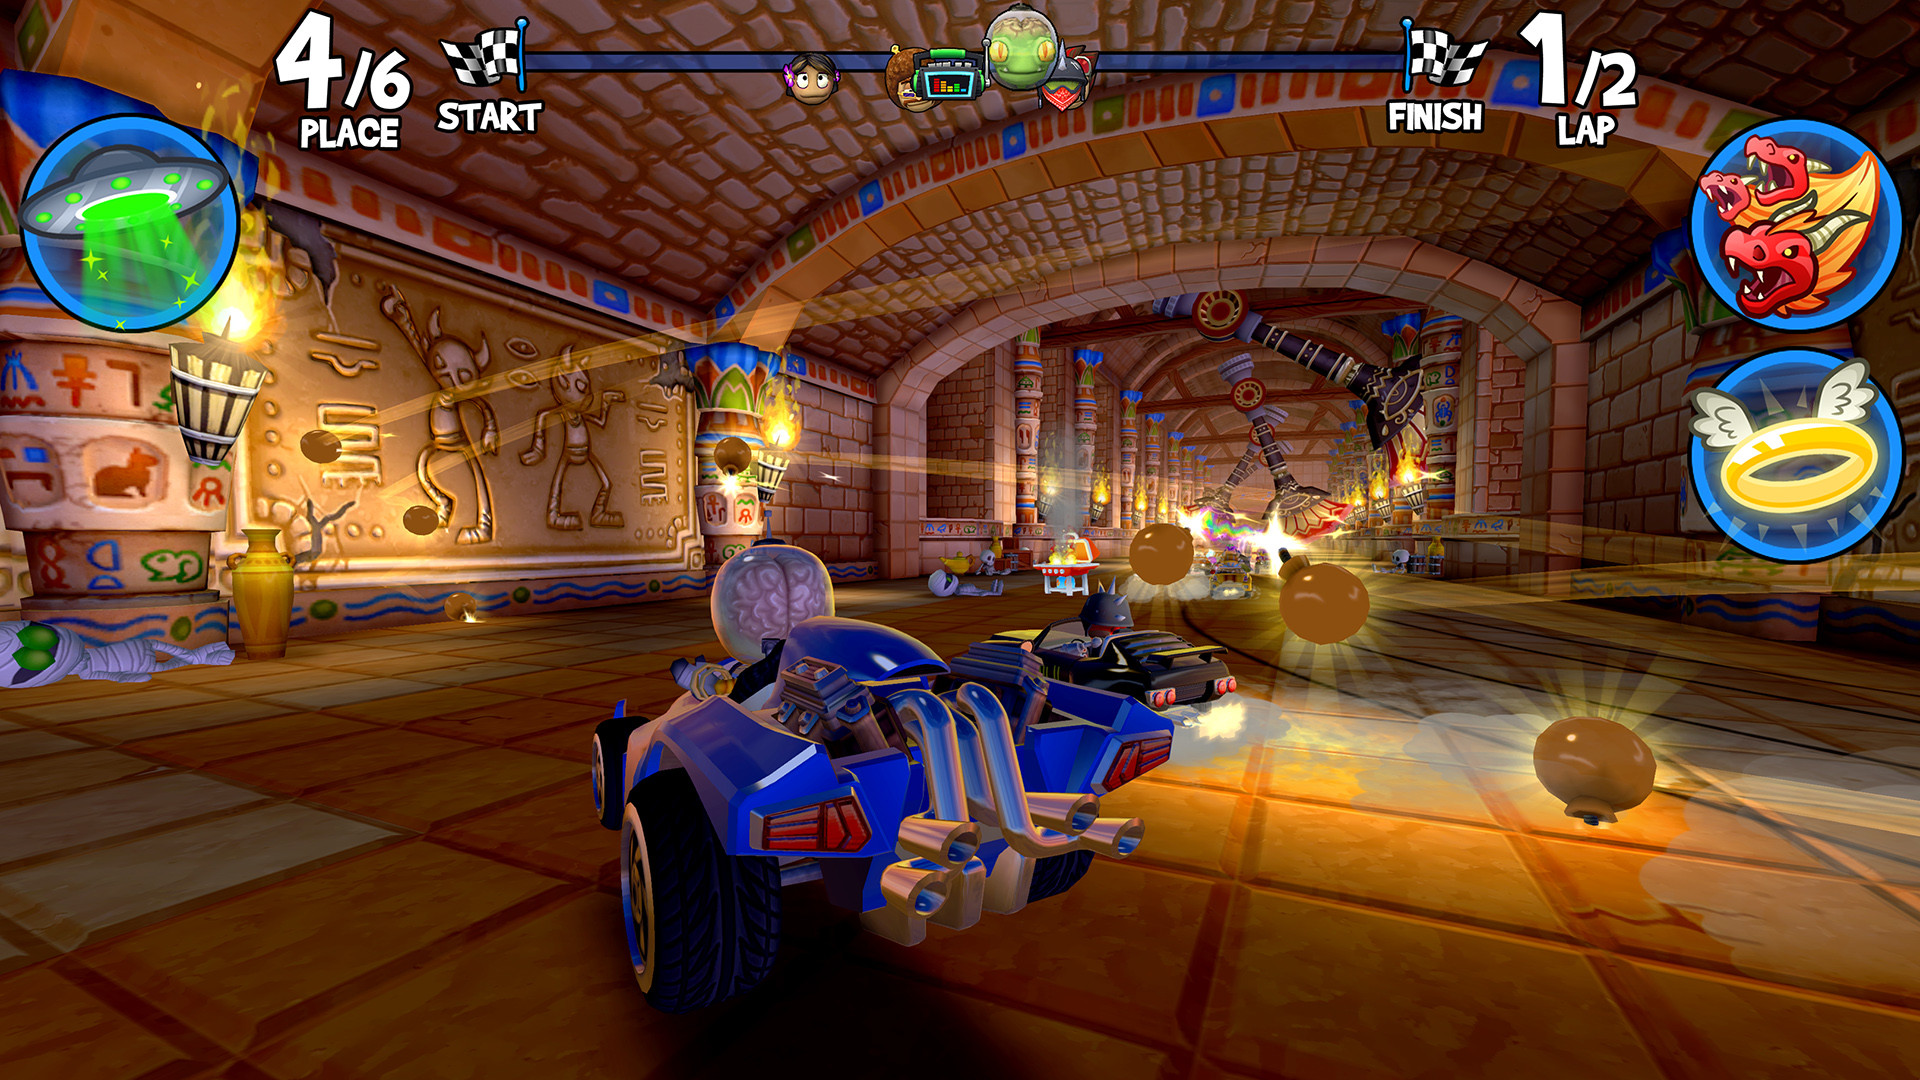 Find the best computers for Beach Buggy Racing 2: Island Adventure